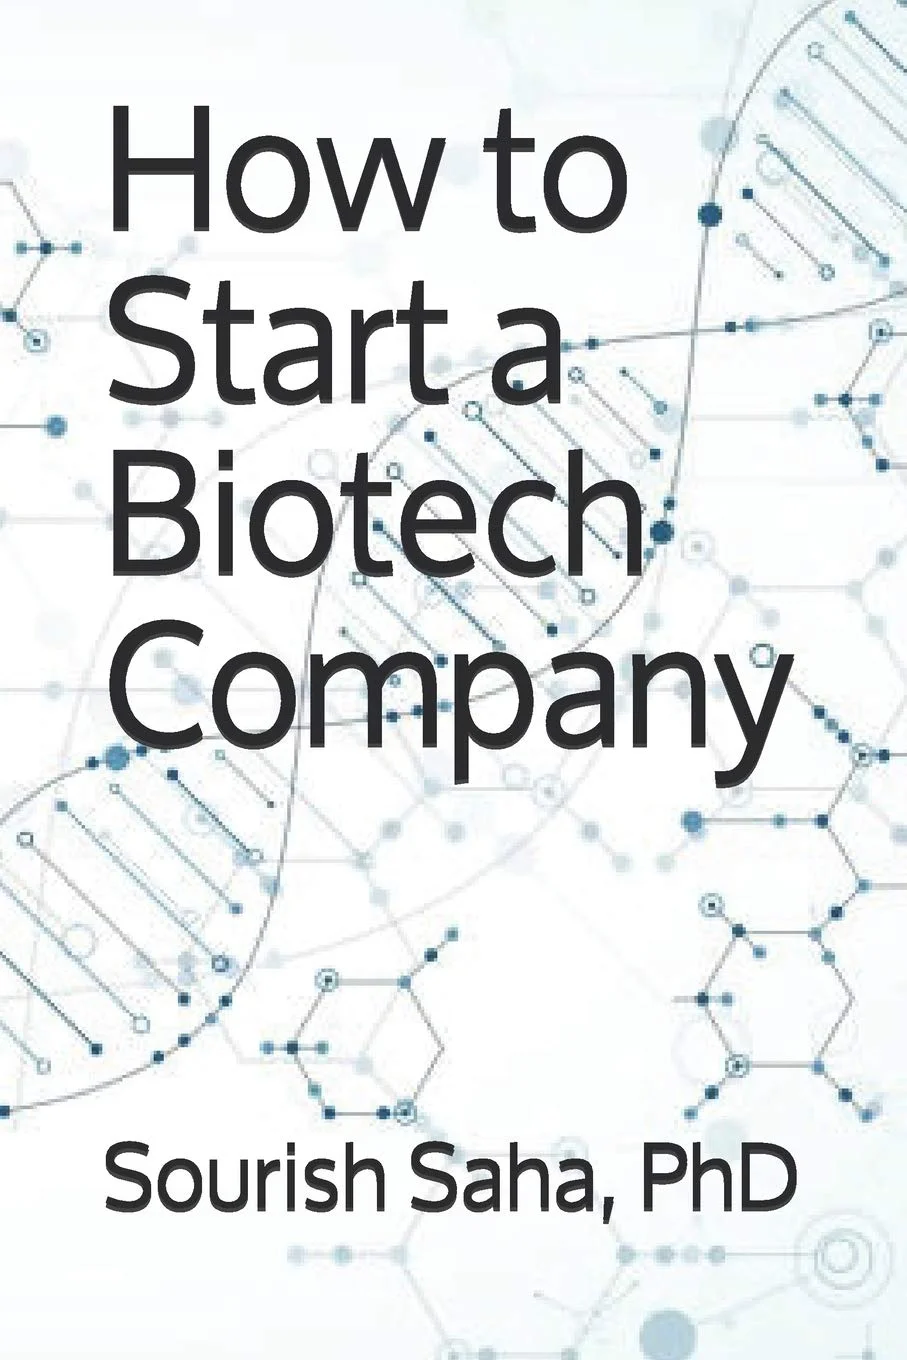 How to Start a Biotech Company book cover